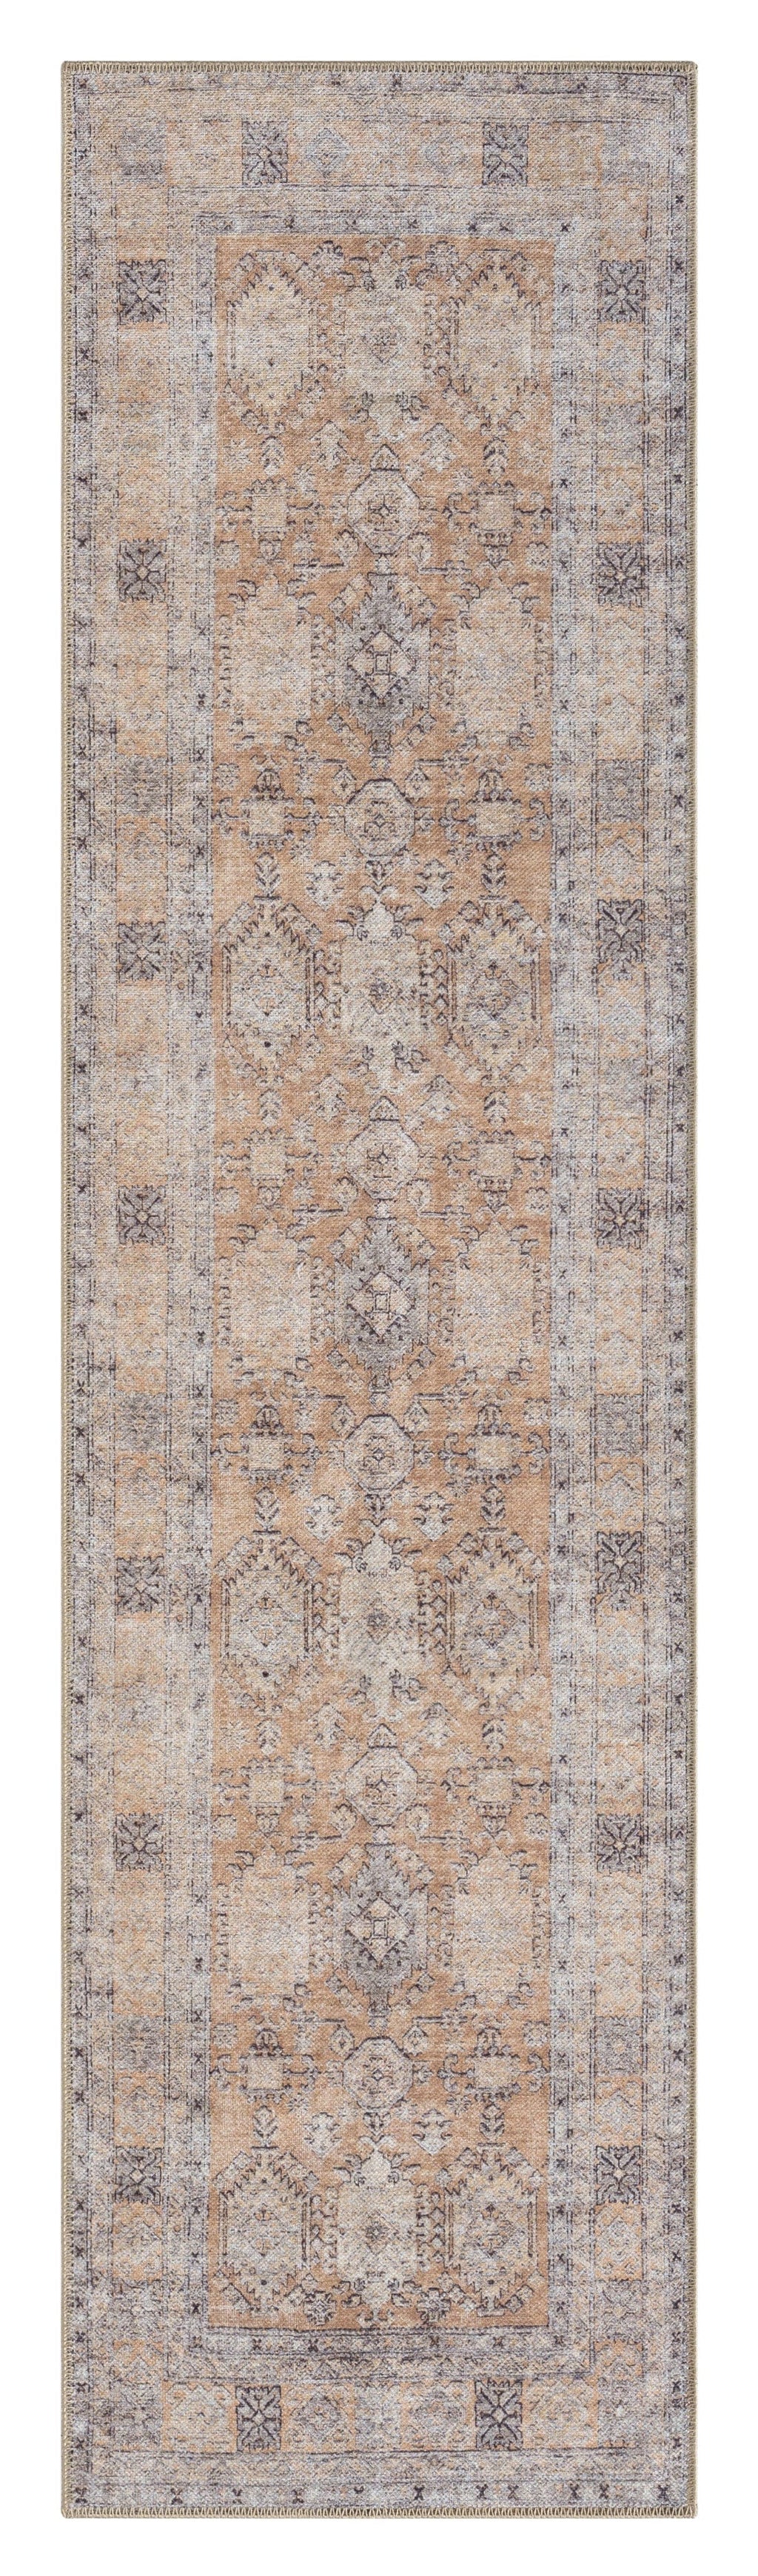 Sydelle Brown and Grey Traditional Distressed Washable Runner Rug